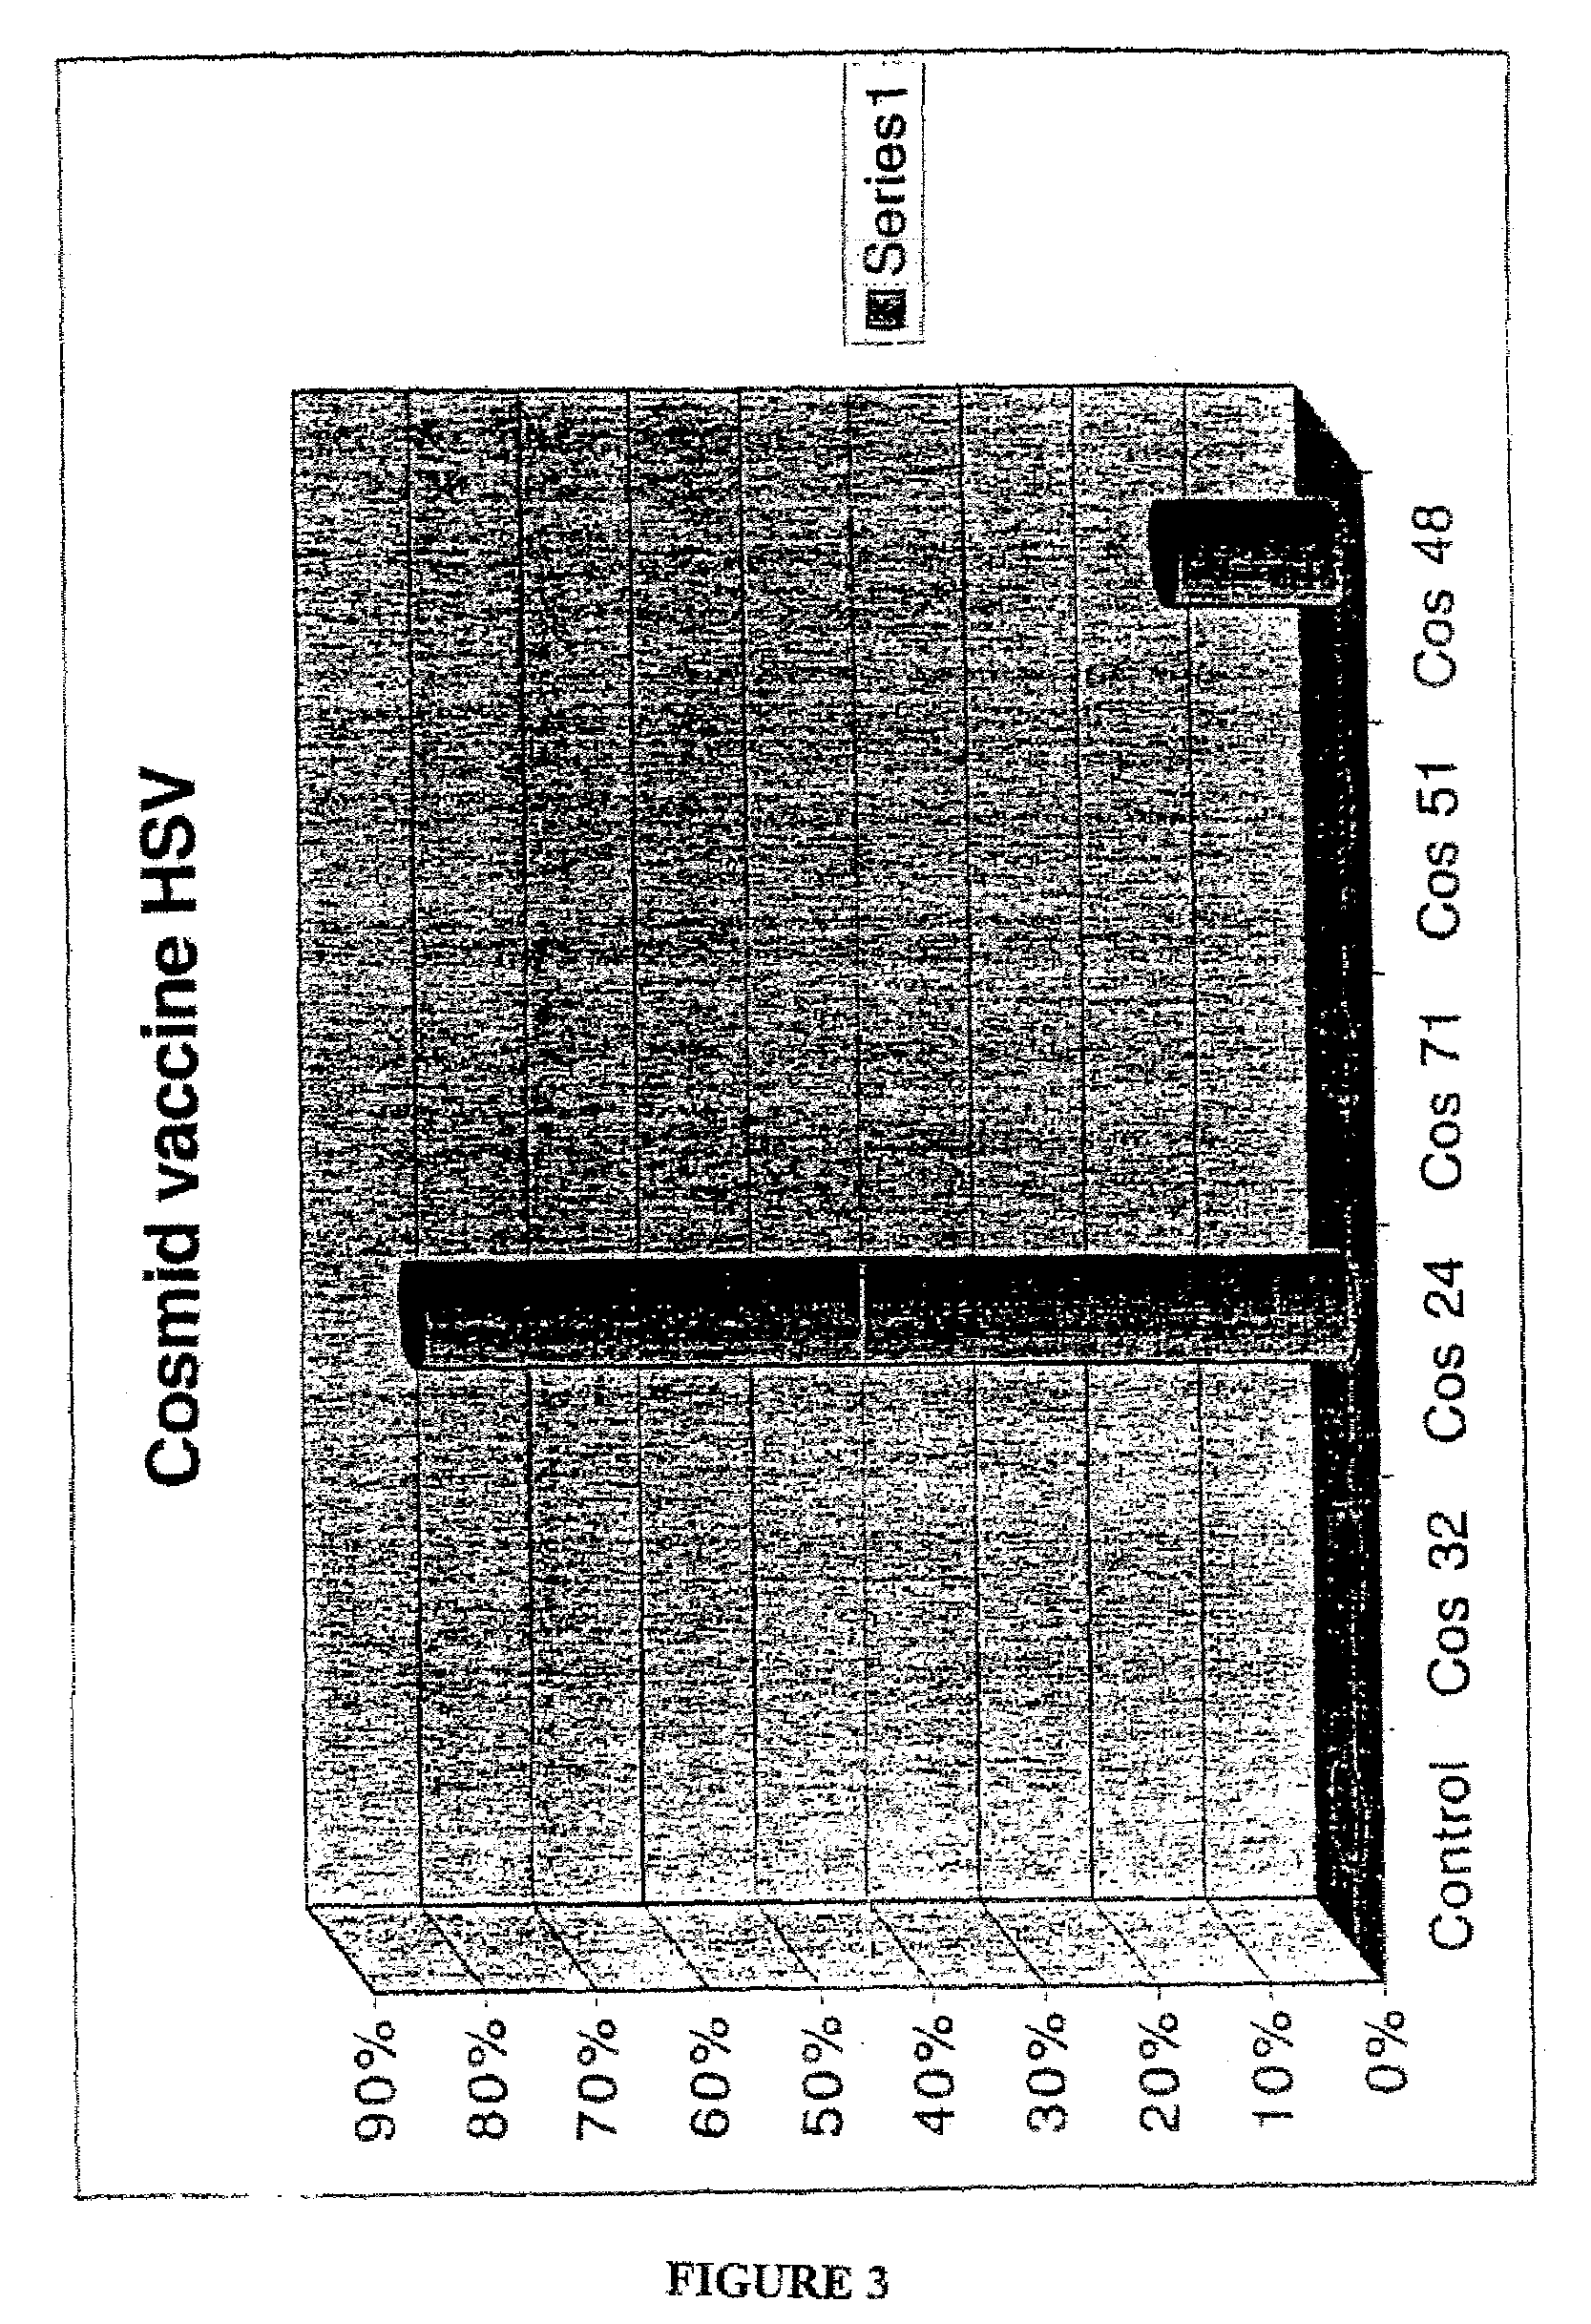 Cosmid DNA constructs and methods of making and using same